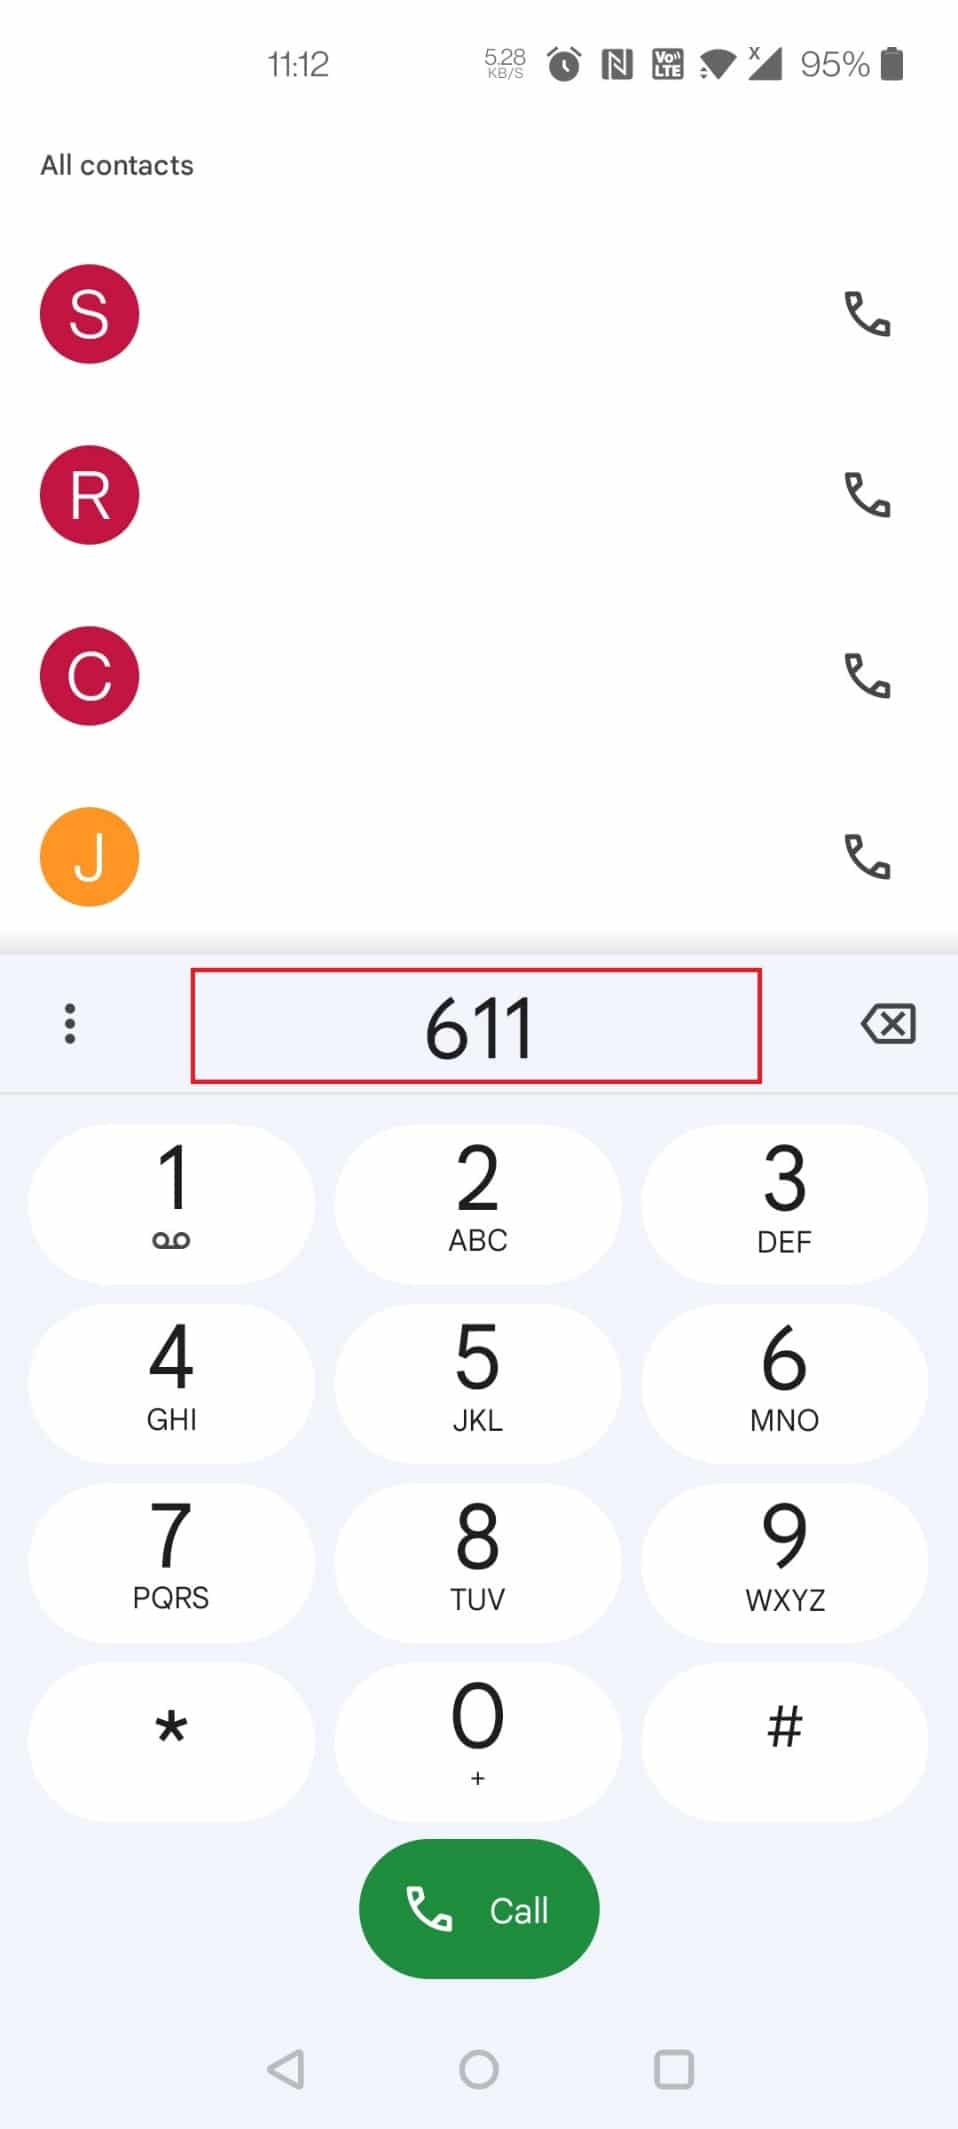 Open the dialer app on your device and dial 611